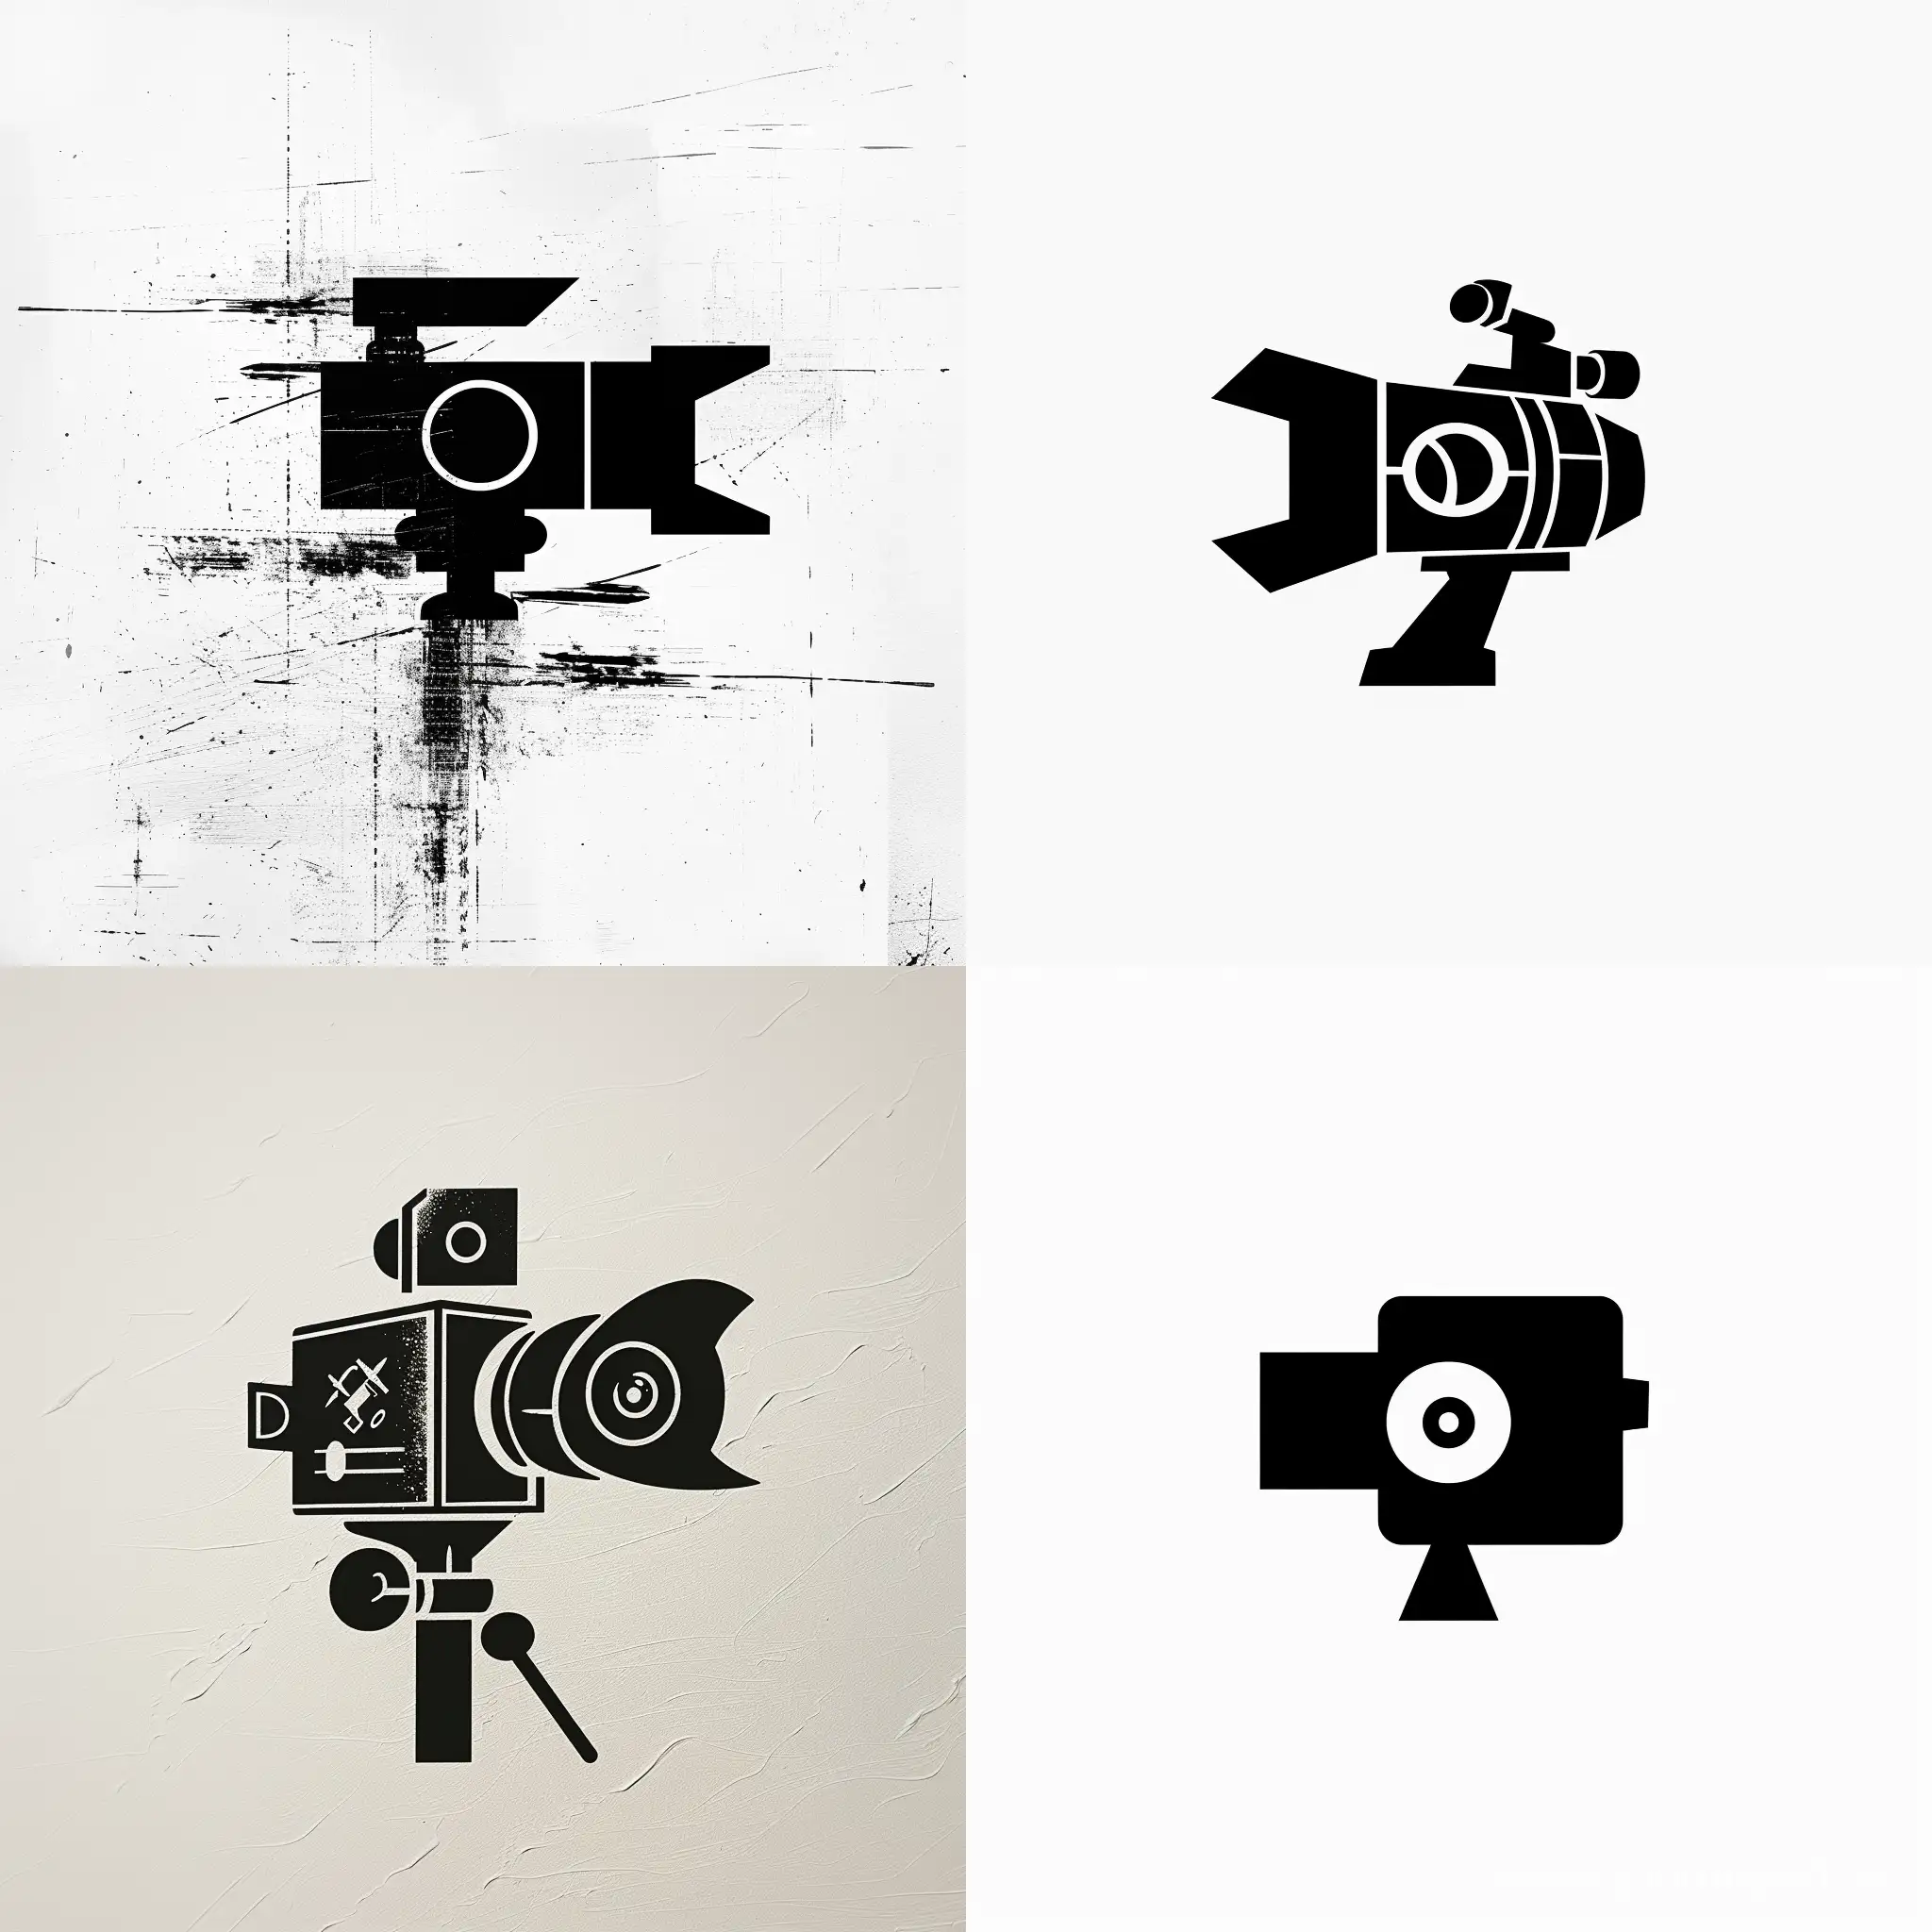 create a logo for the media center - TV channel, on a white background, the logo is black, something like a camera should be present in the logo